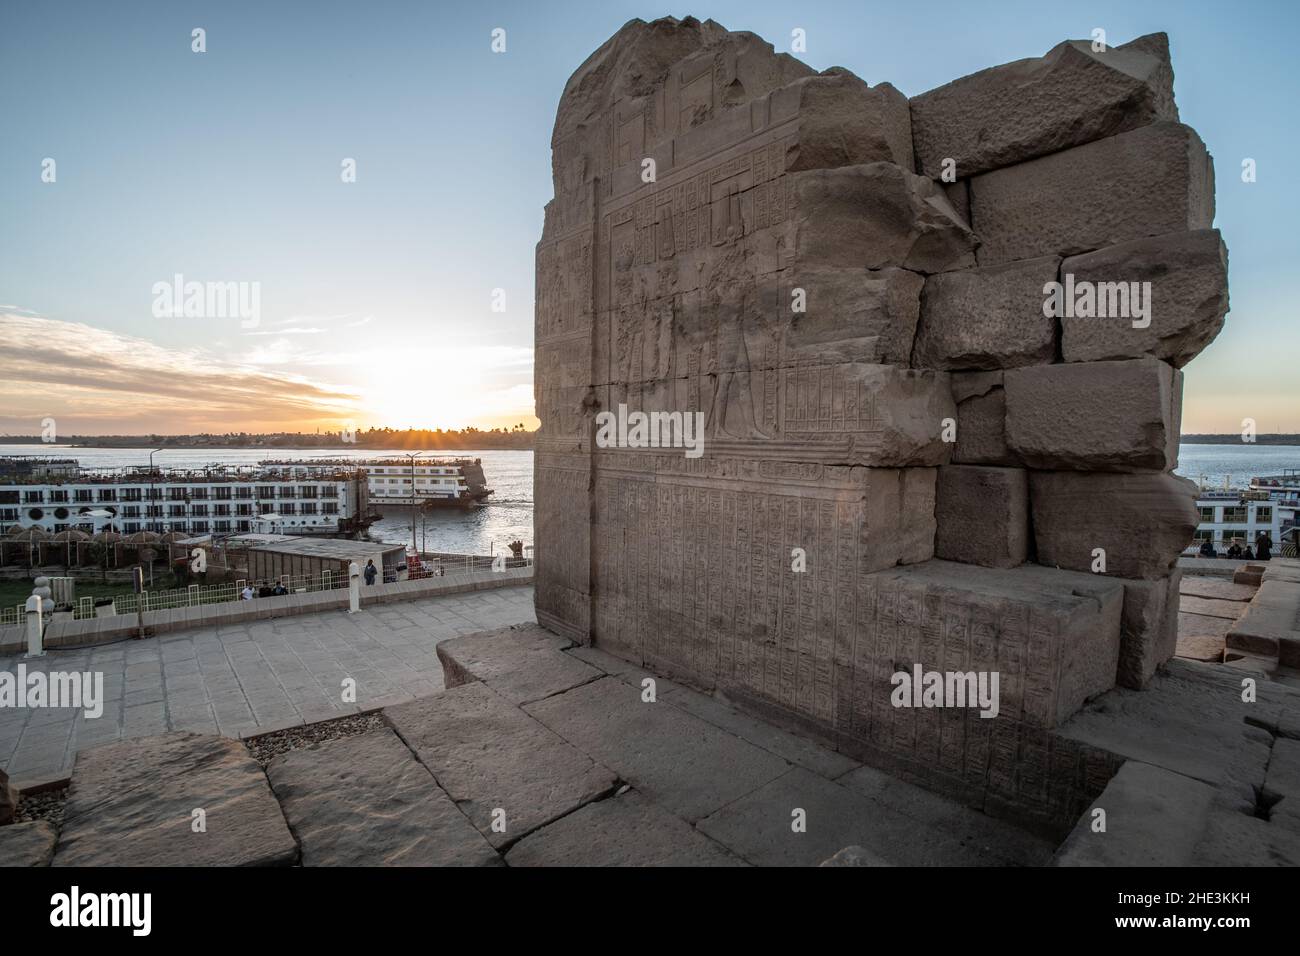 An ancient ruin at Kom Ombo temple overlooking the Nile river and docked cruise boats that bring tourists to the historic monument. Stock Photo